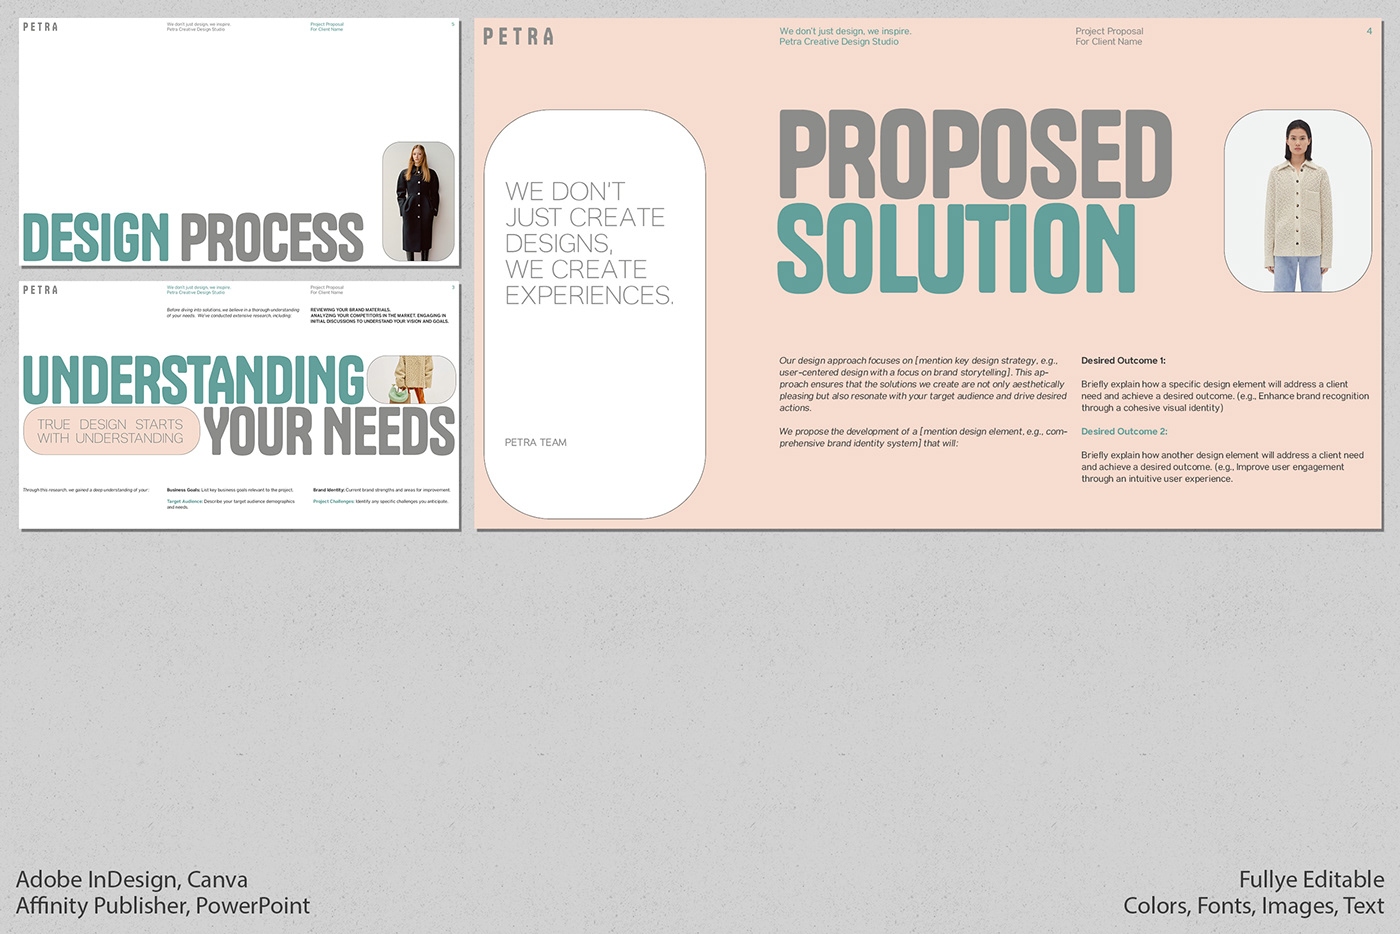 InDesign indesign template Affinity Publisher publisher project proposal brand proposal Business Proposal Powerpoint canva presentation